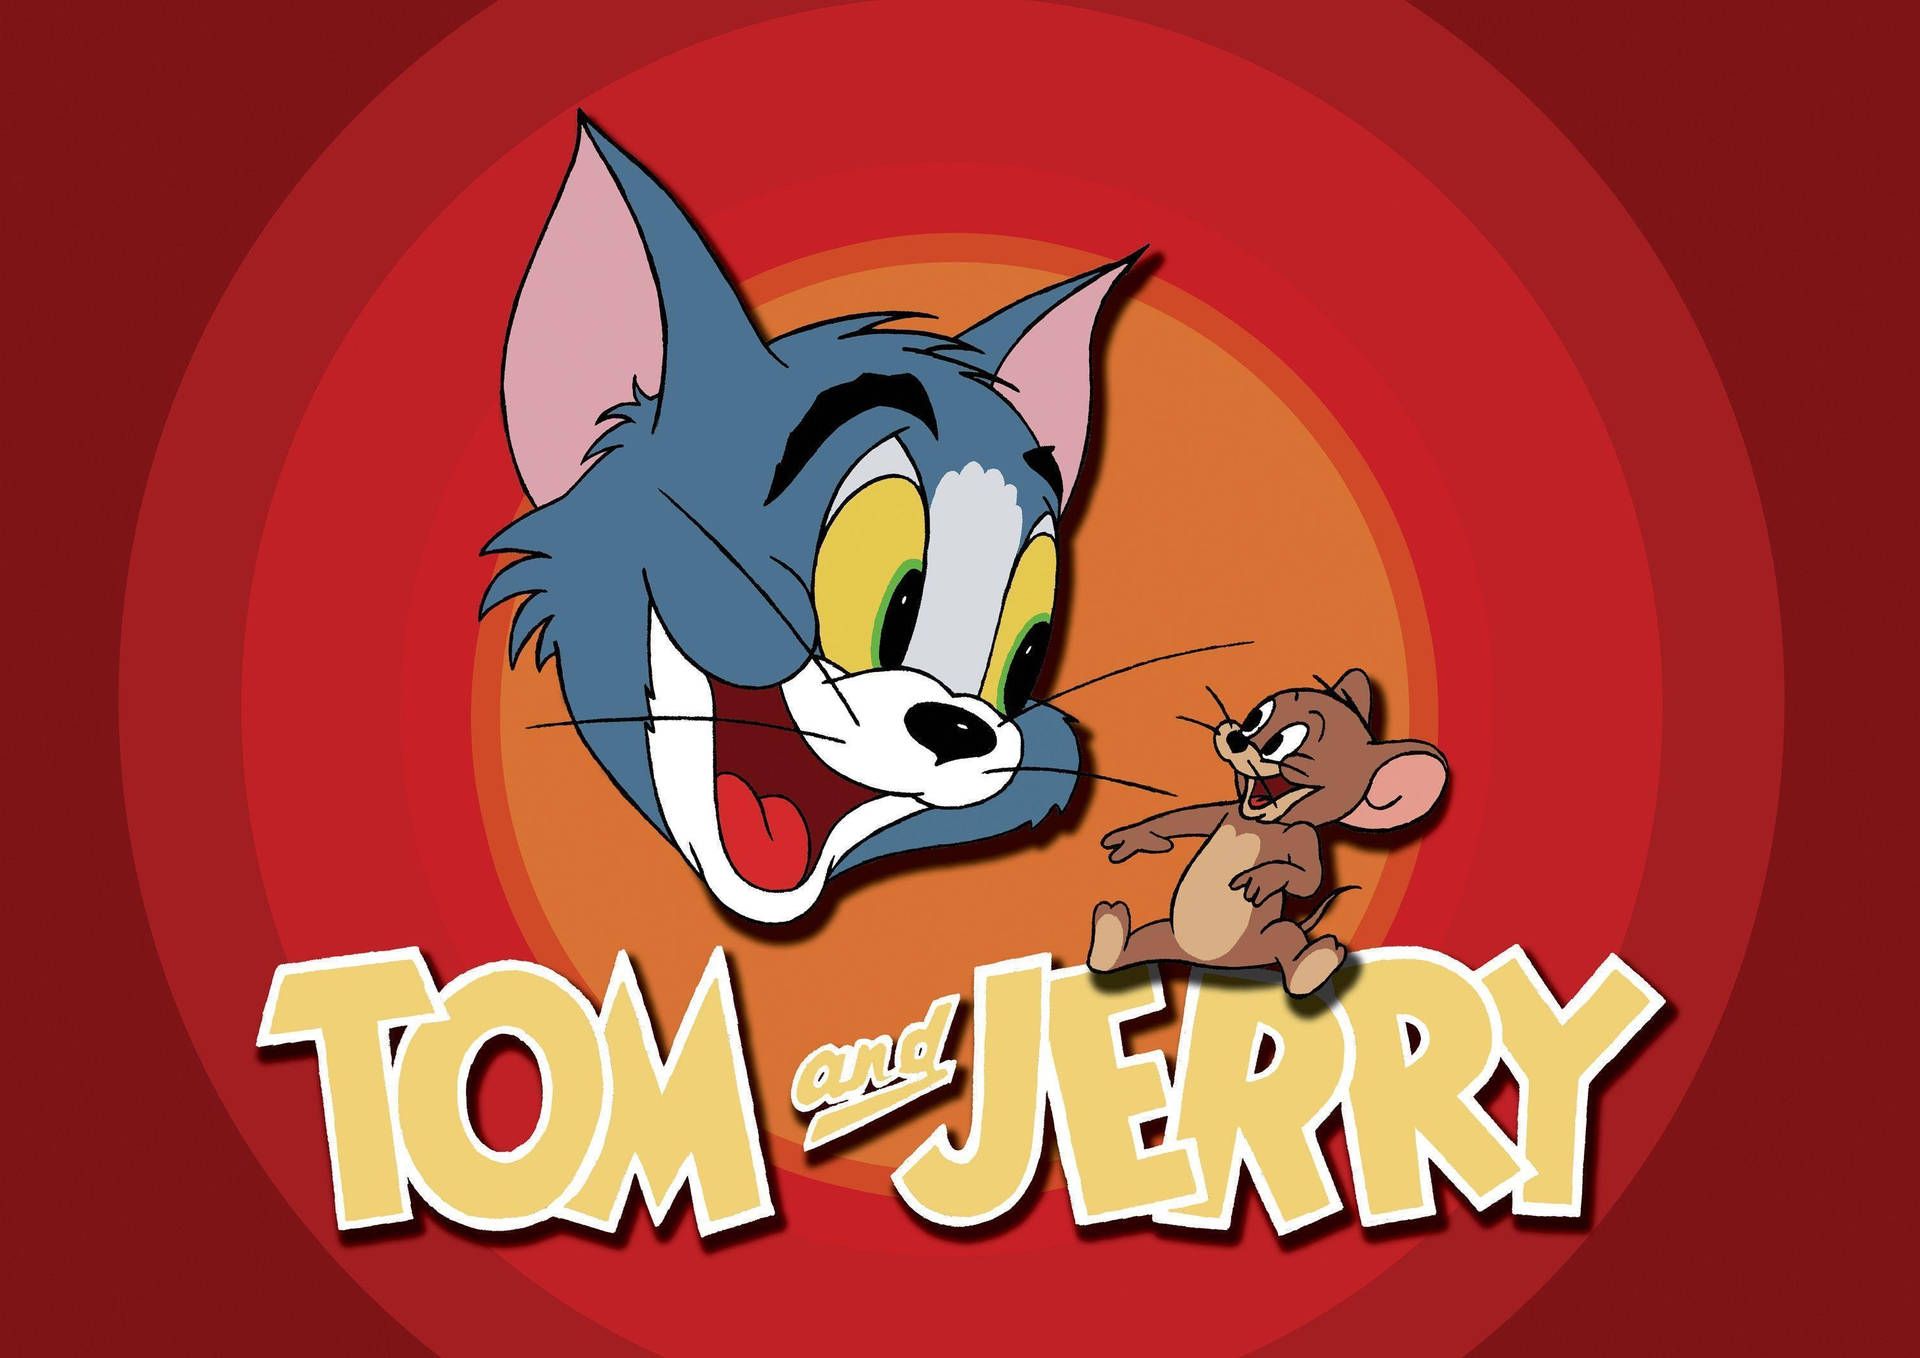 Tom and Jerry is a classic cartoon show - Tom and Jerry